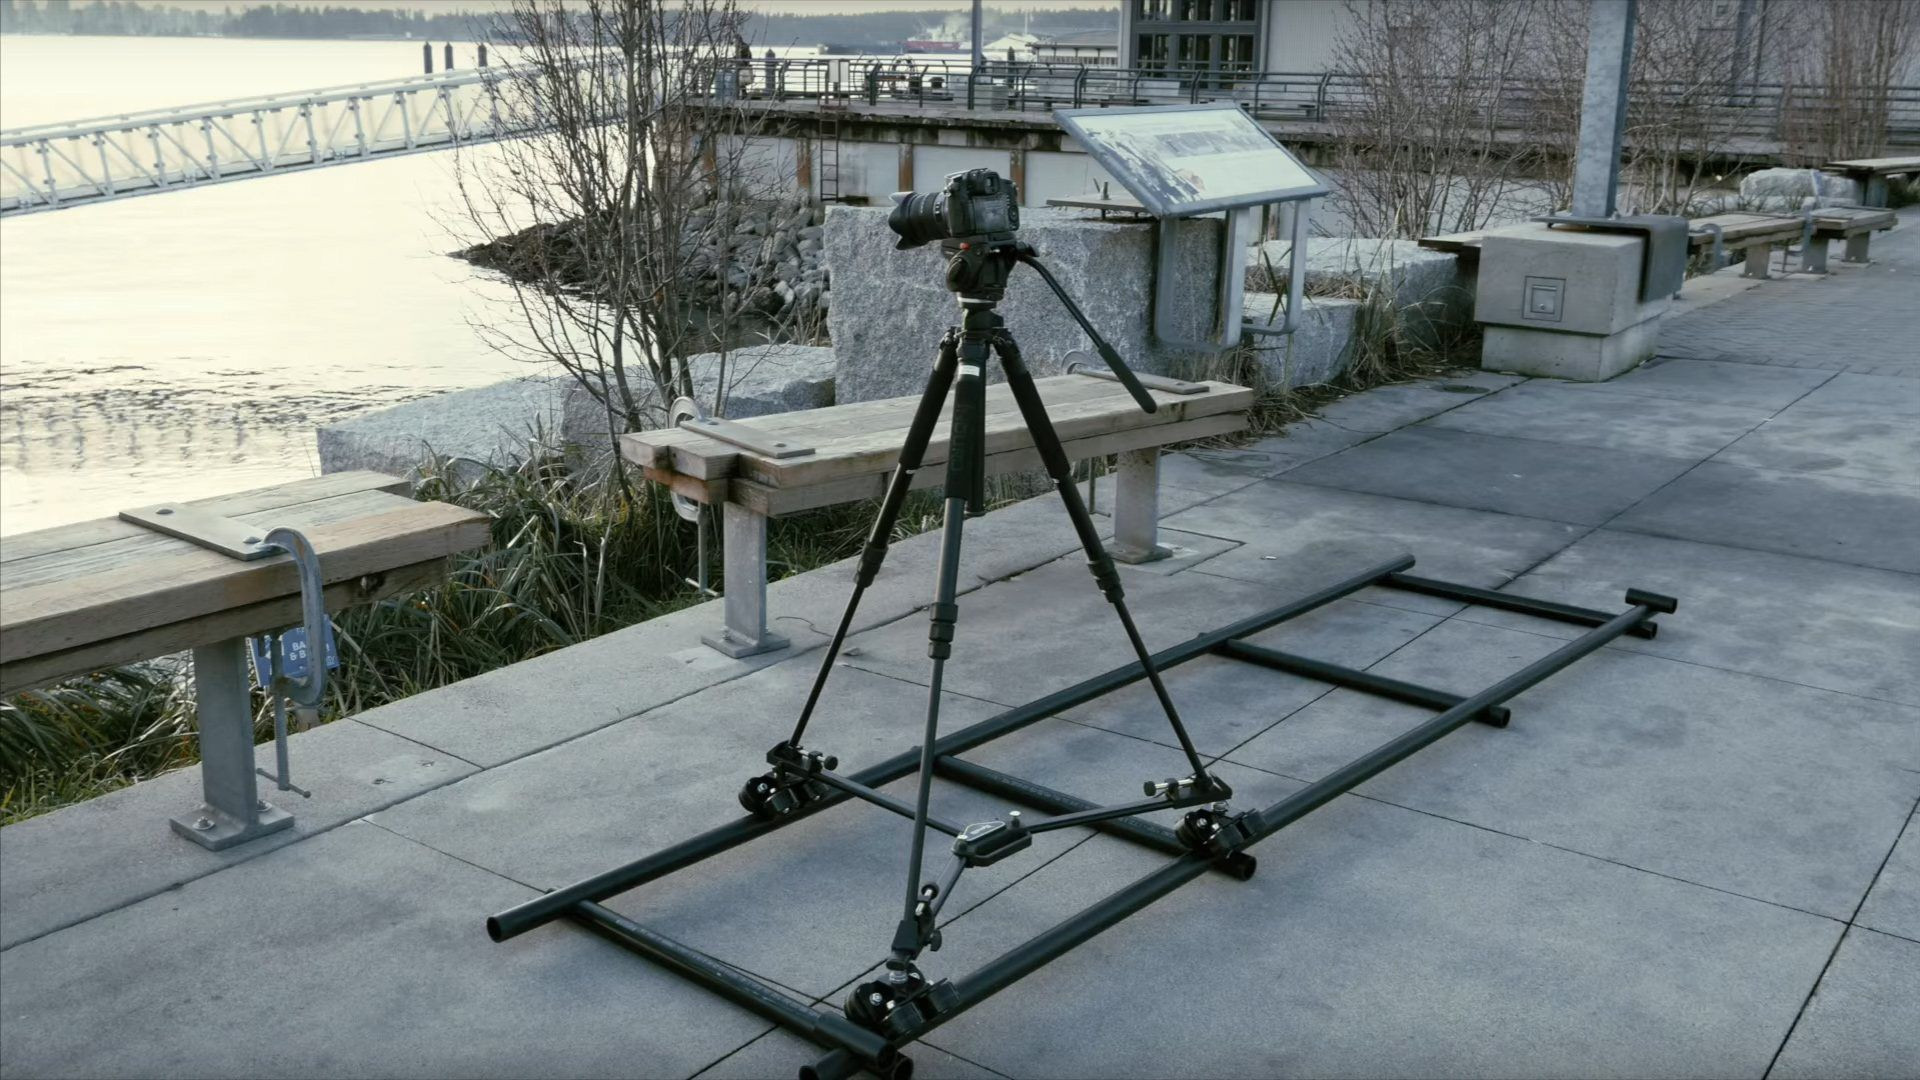 DIY Camera Dolly Track
 How to convert a floor dolly into a DIY tripod track dolly